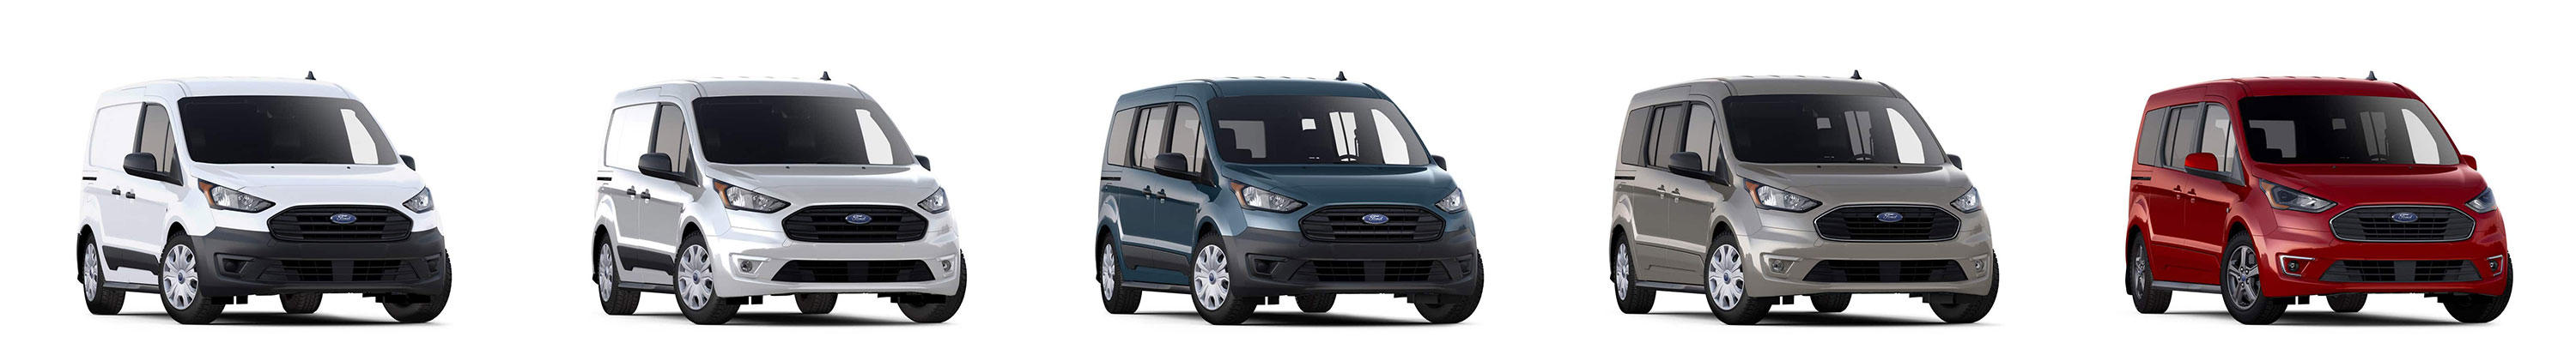 2019 Ford Transit Connect Trims and Options